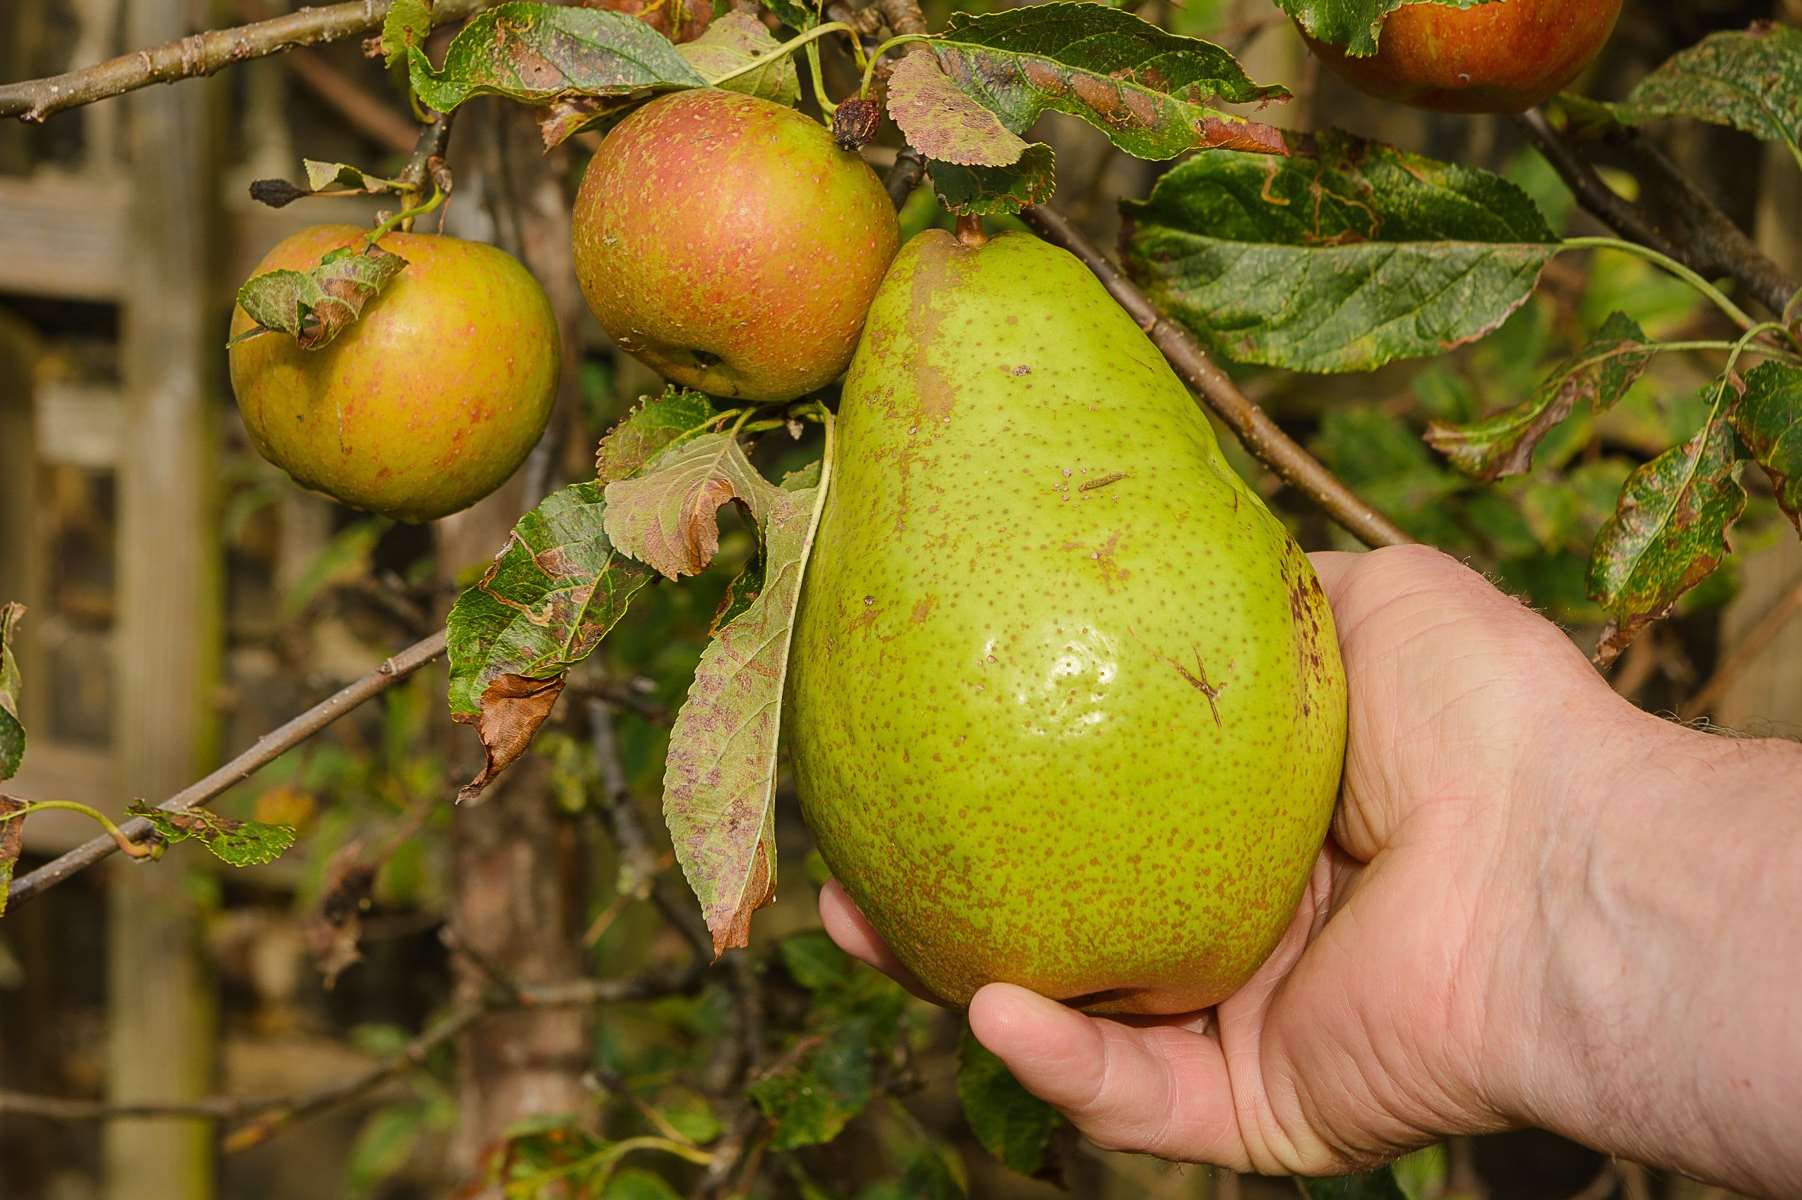 The pears are far larger than your average fruit